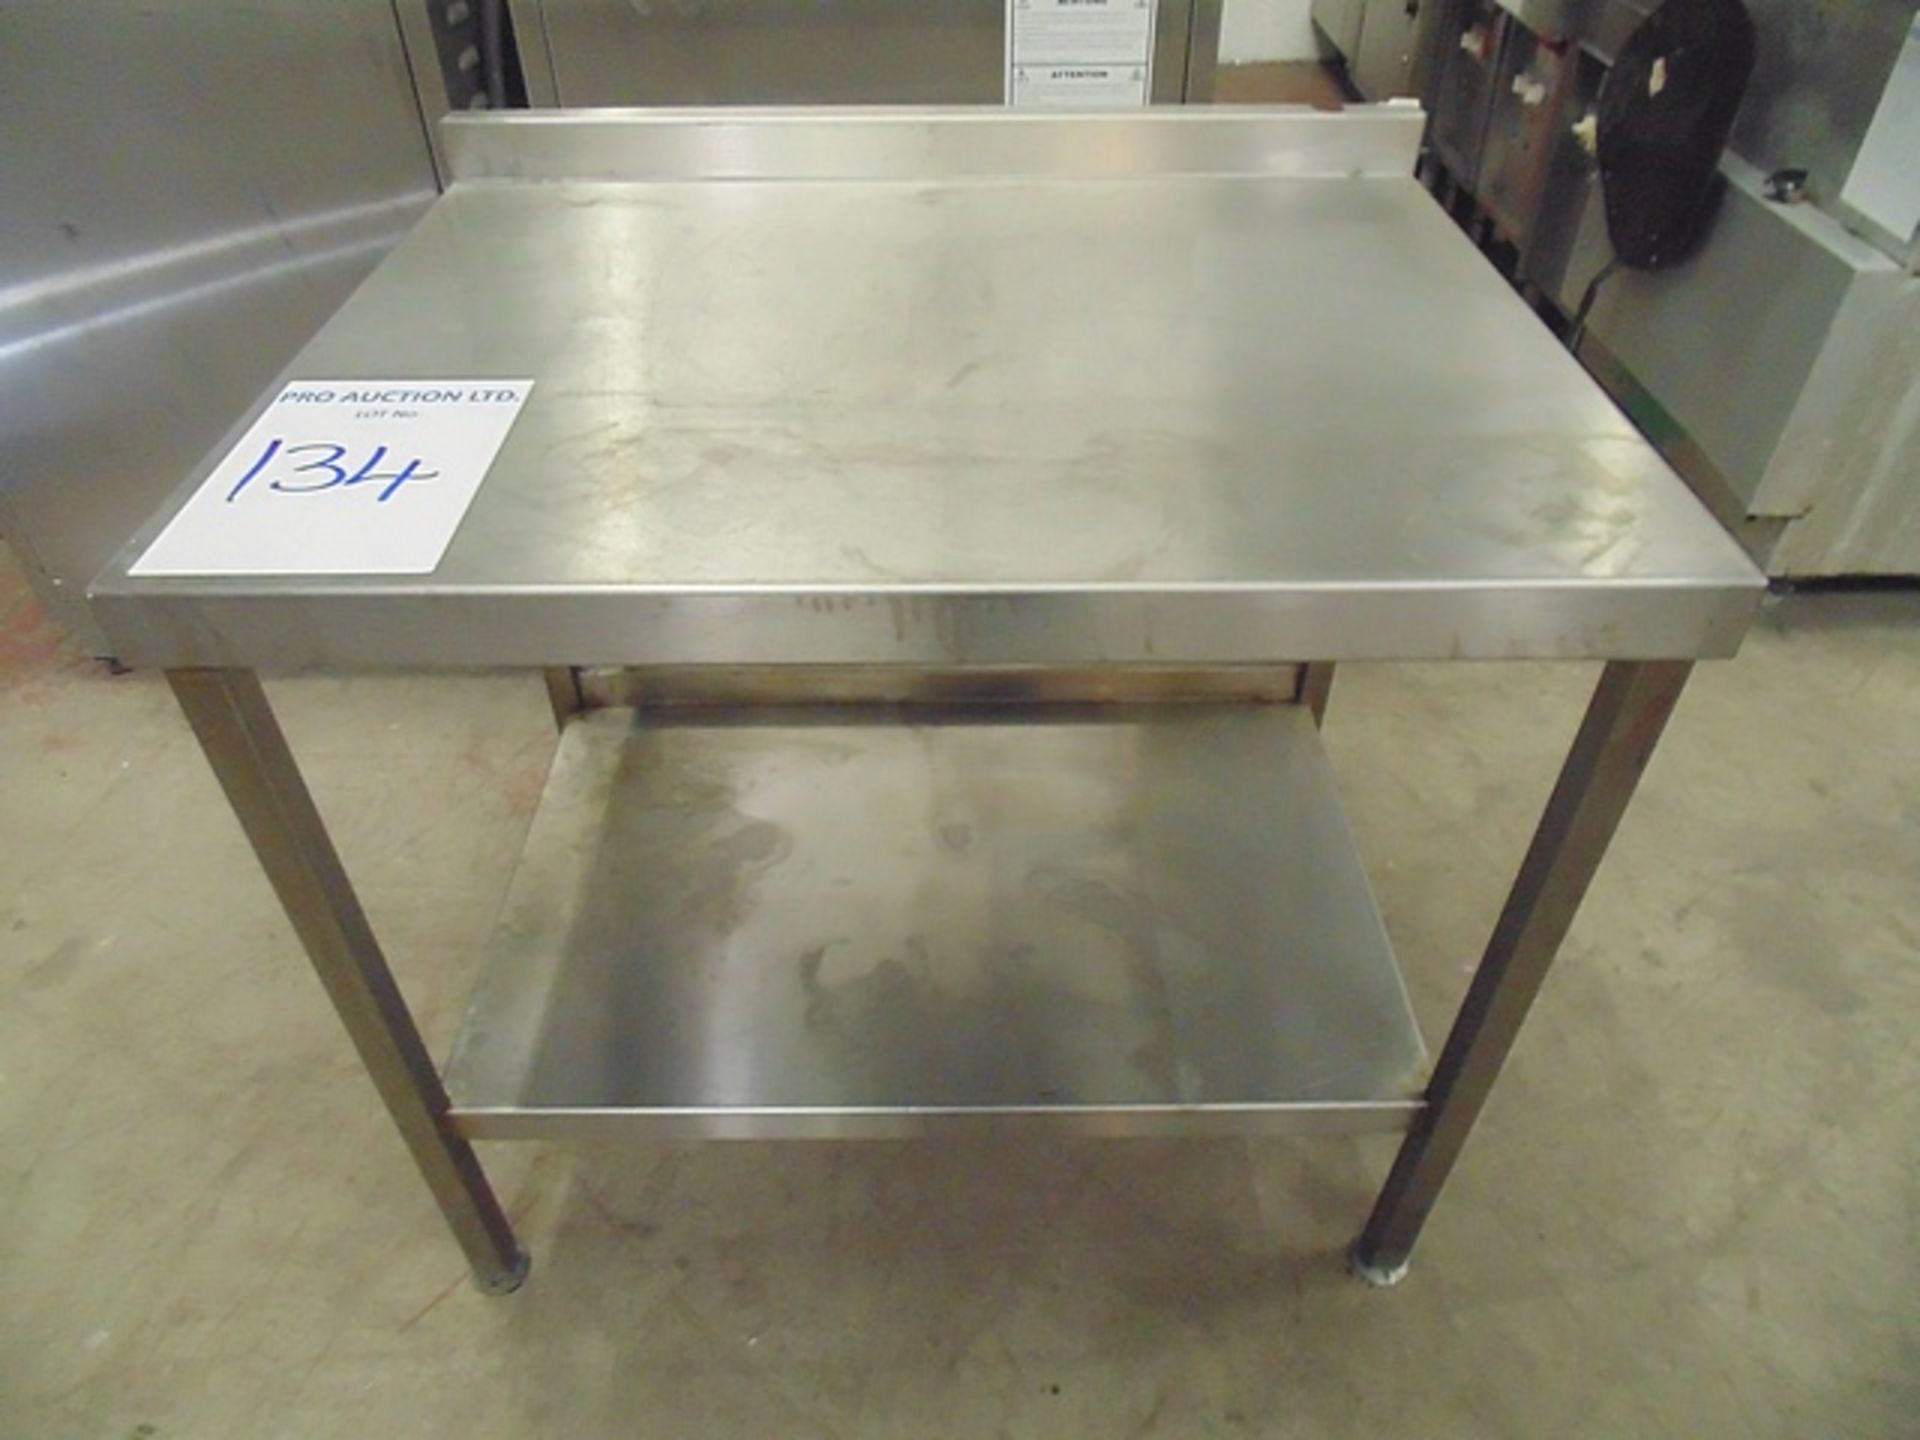 Stainless steel preparation table 830mm x 650mm x 750mm